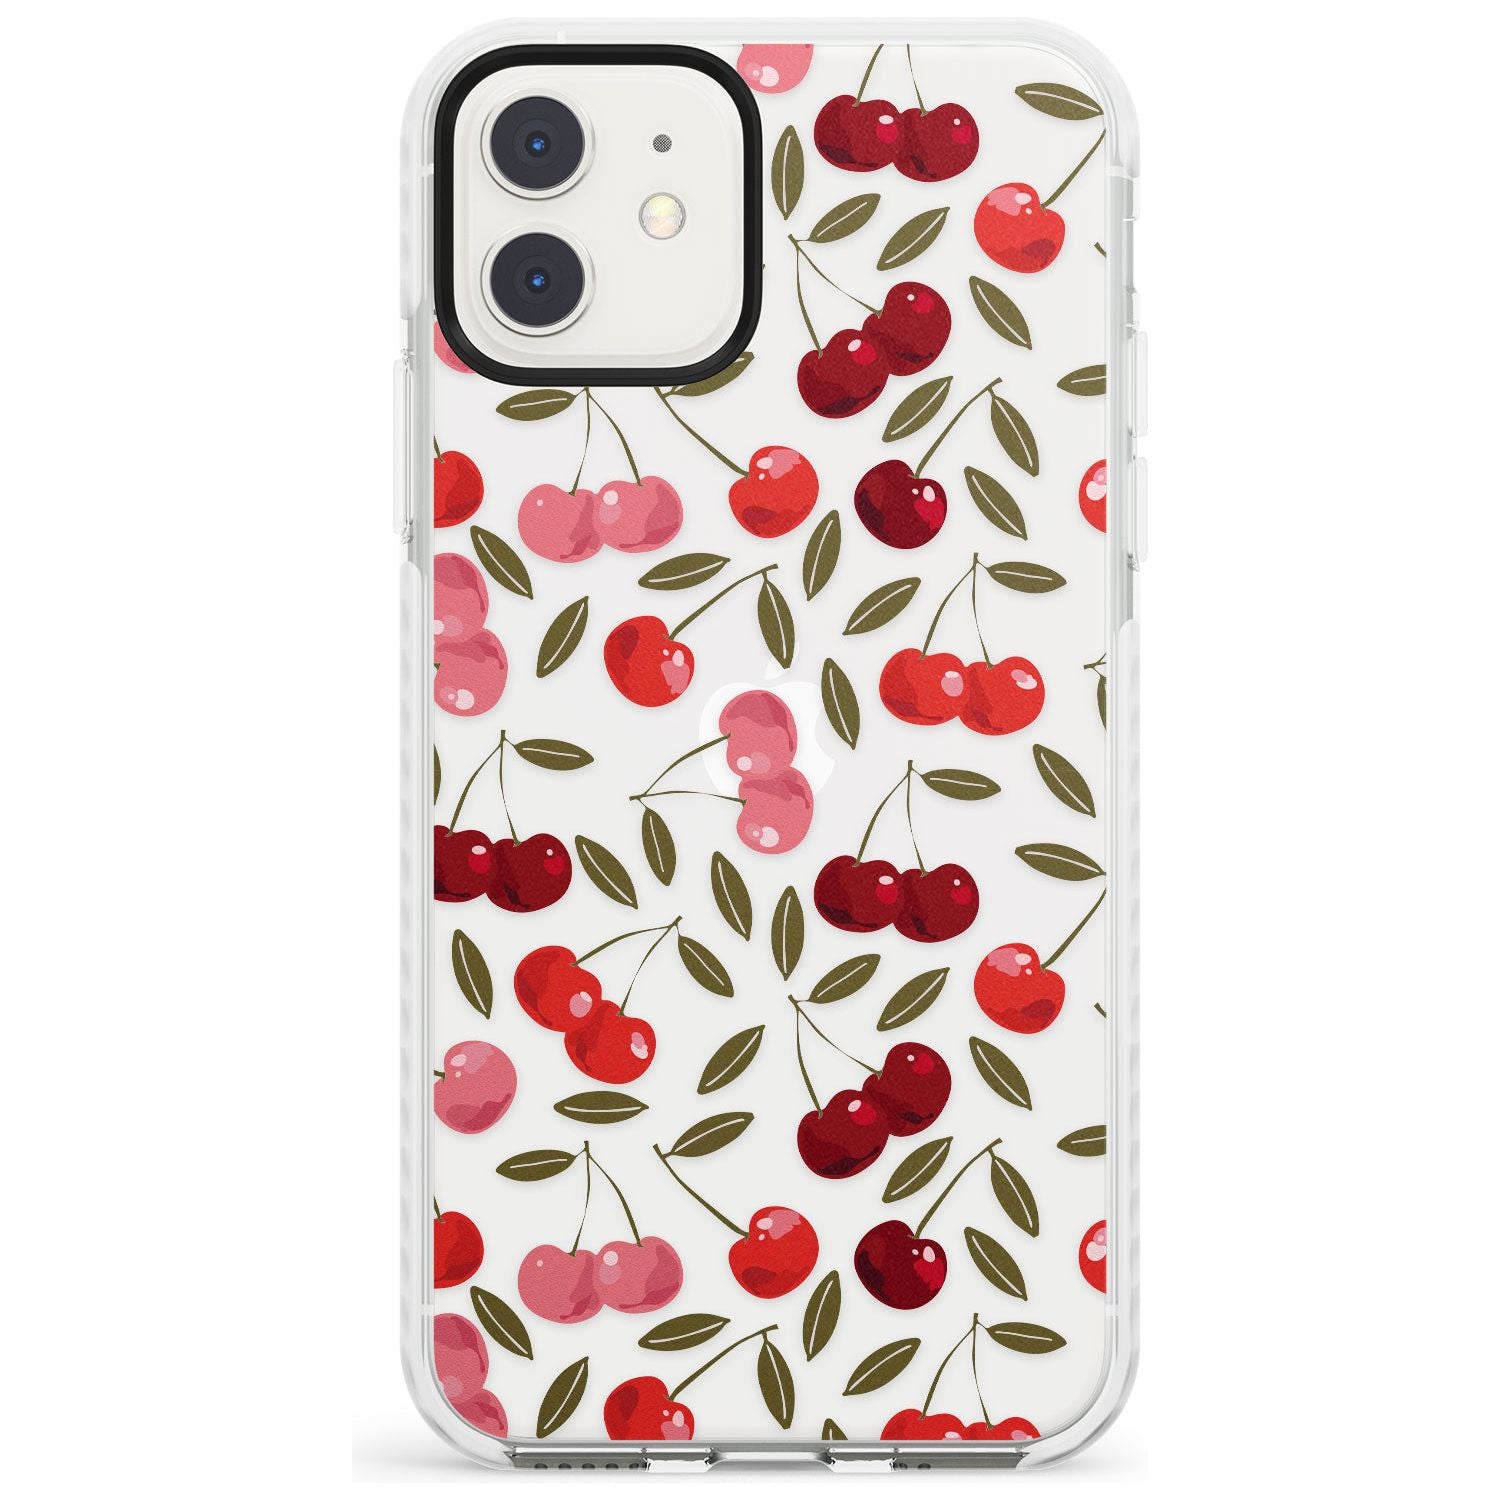 Cherry on top Impact Phone Case for iPhone 11